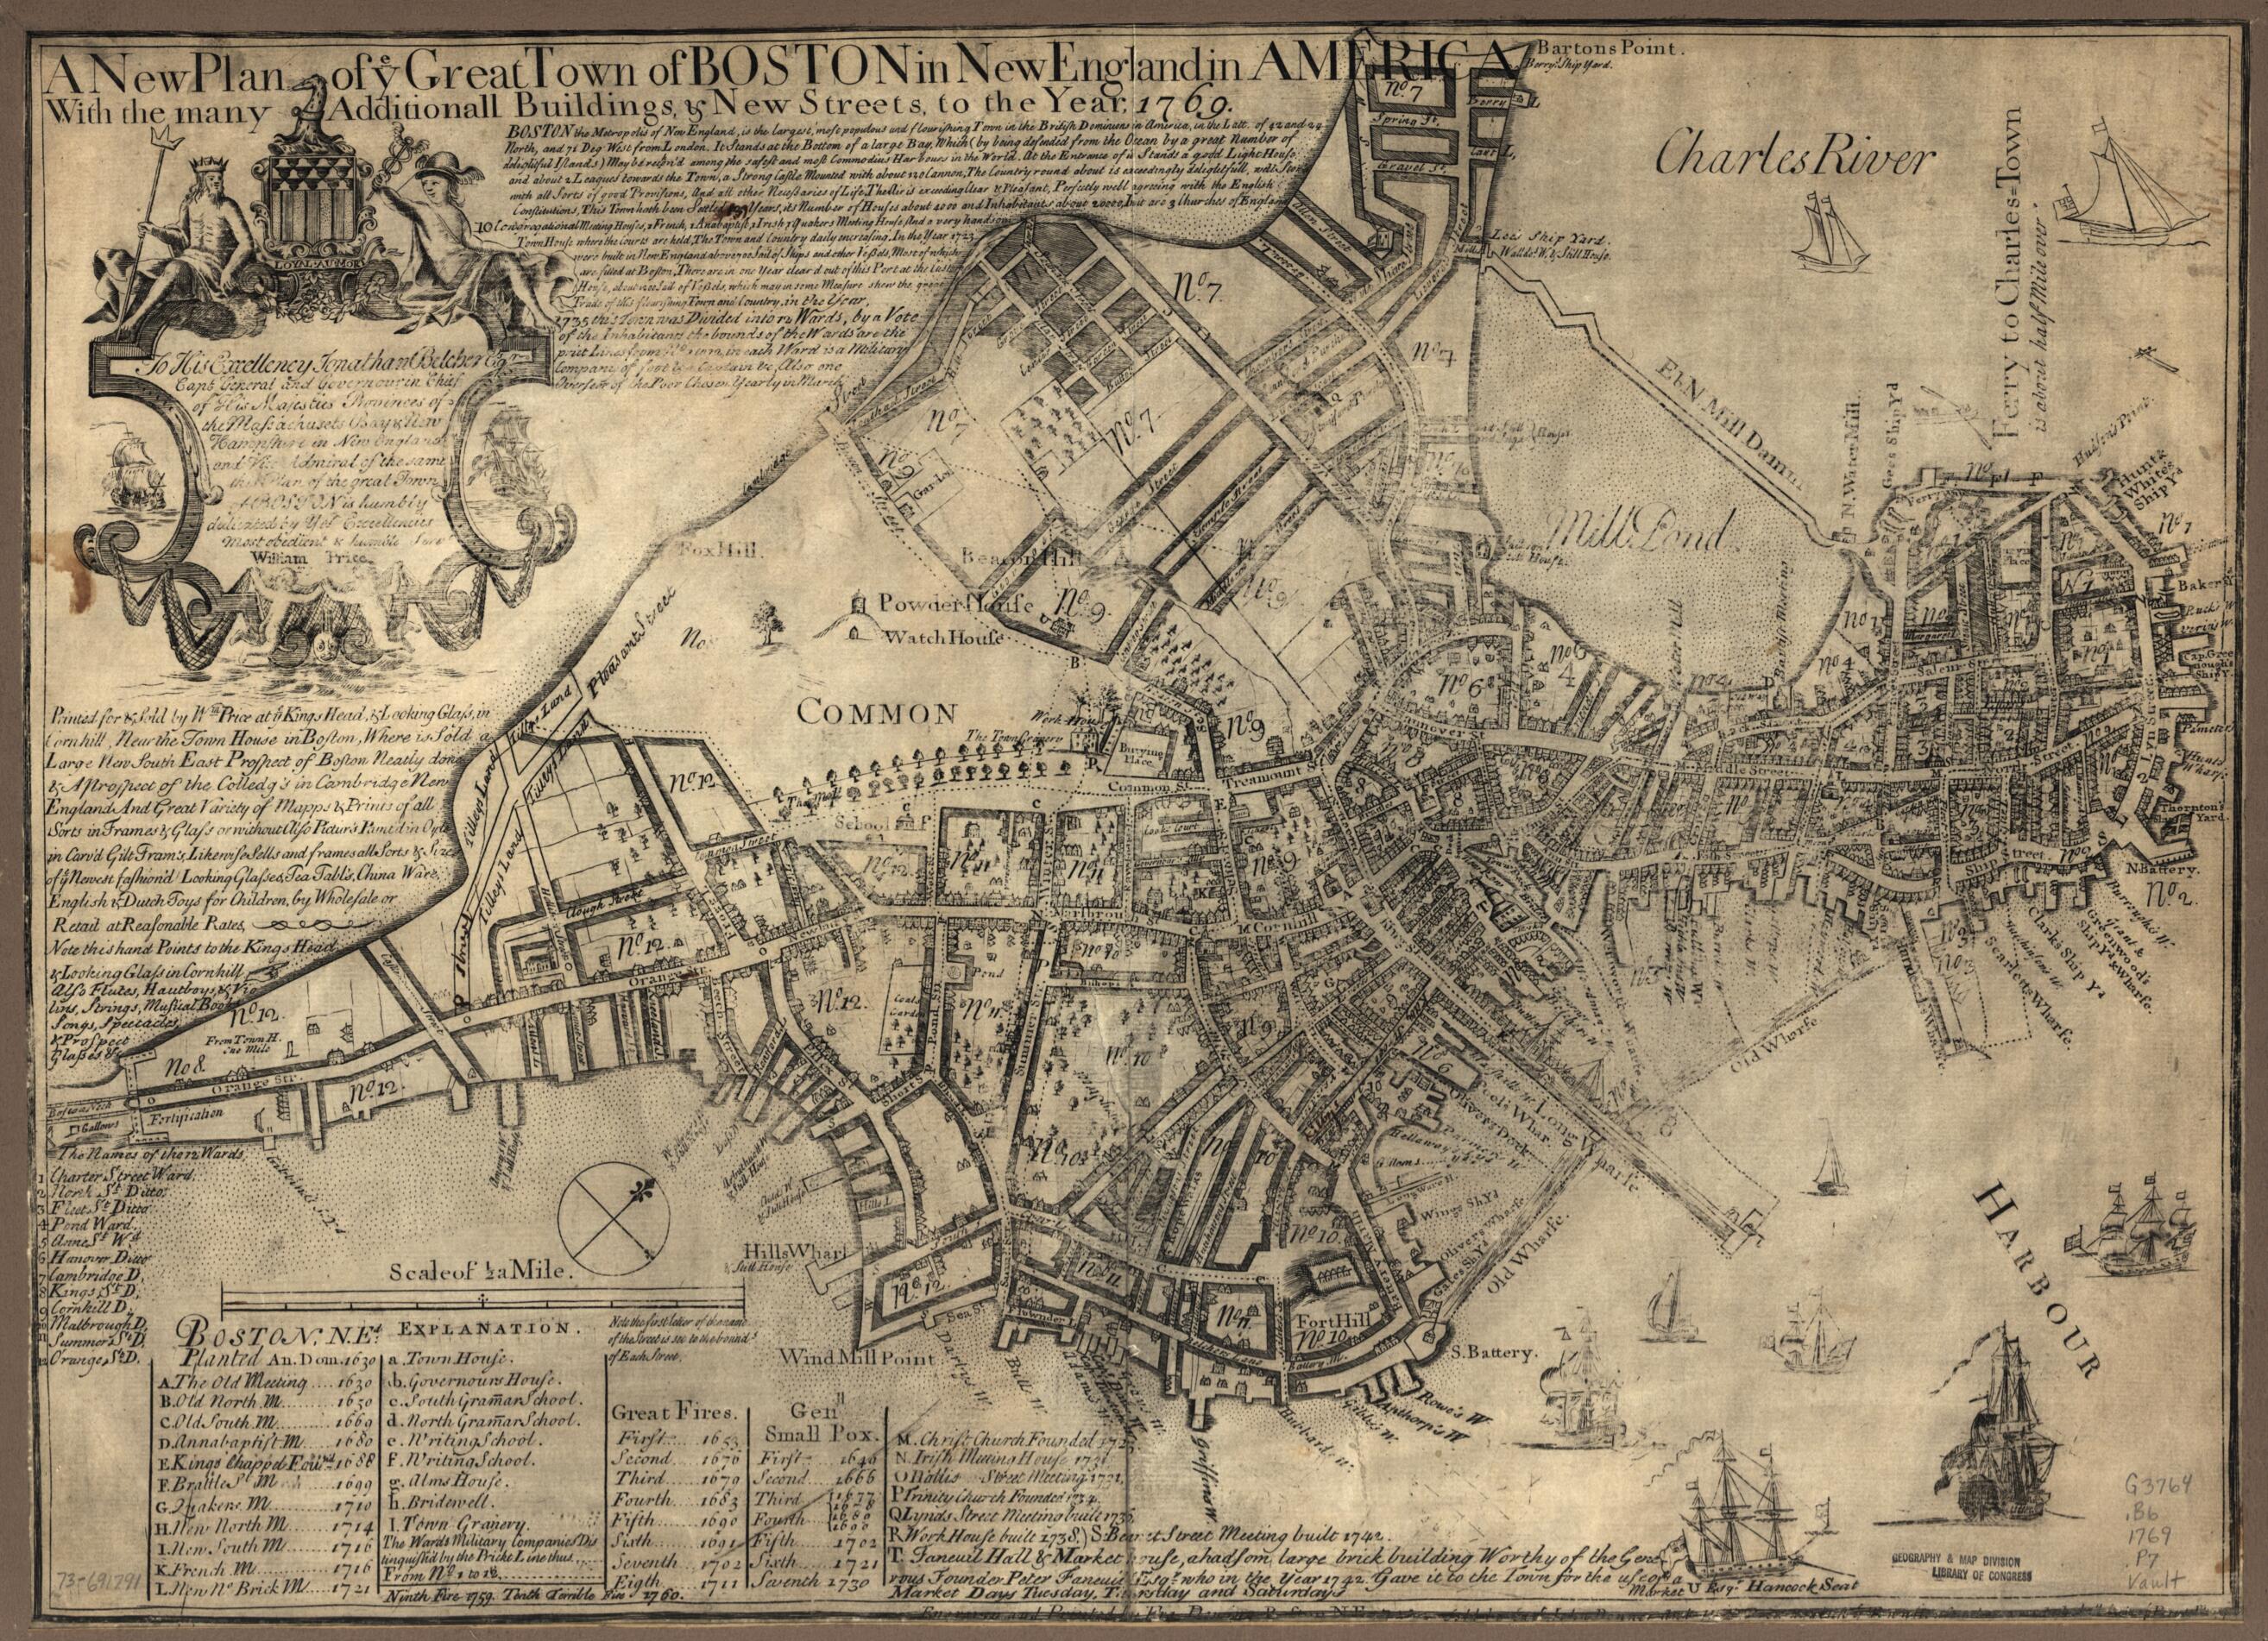 This old map of A New Plan of Ye Great Town of Boston In New England In America With the Many Additionall Buildings &amp; New Streets, to the Year, from 1769 was created by William Price in 1769